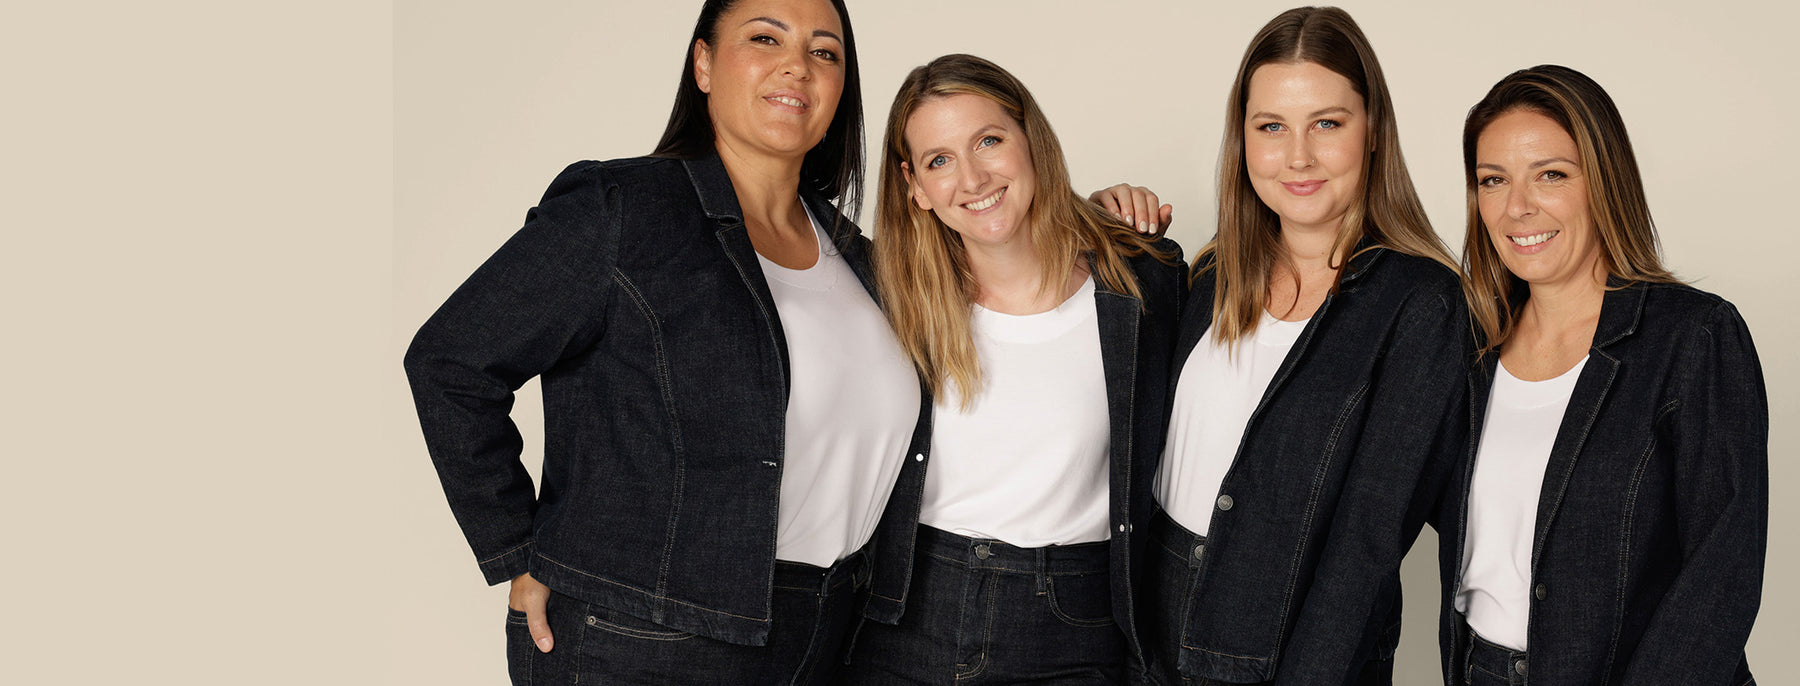 Great for women of all shapes and shizes, the Brady denim jacket is a blazer style jacket designed to create a denim tuxedo look with high-waisted jeans.